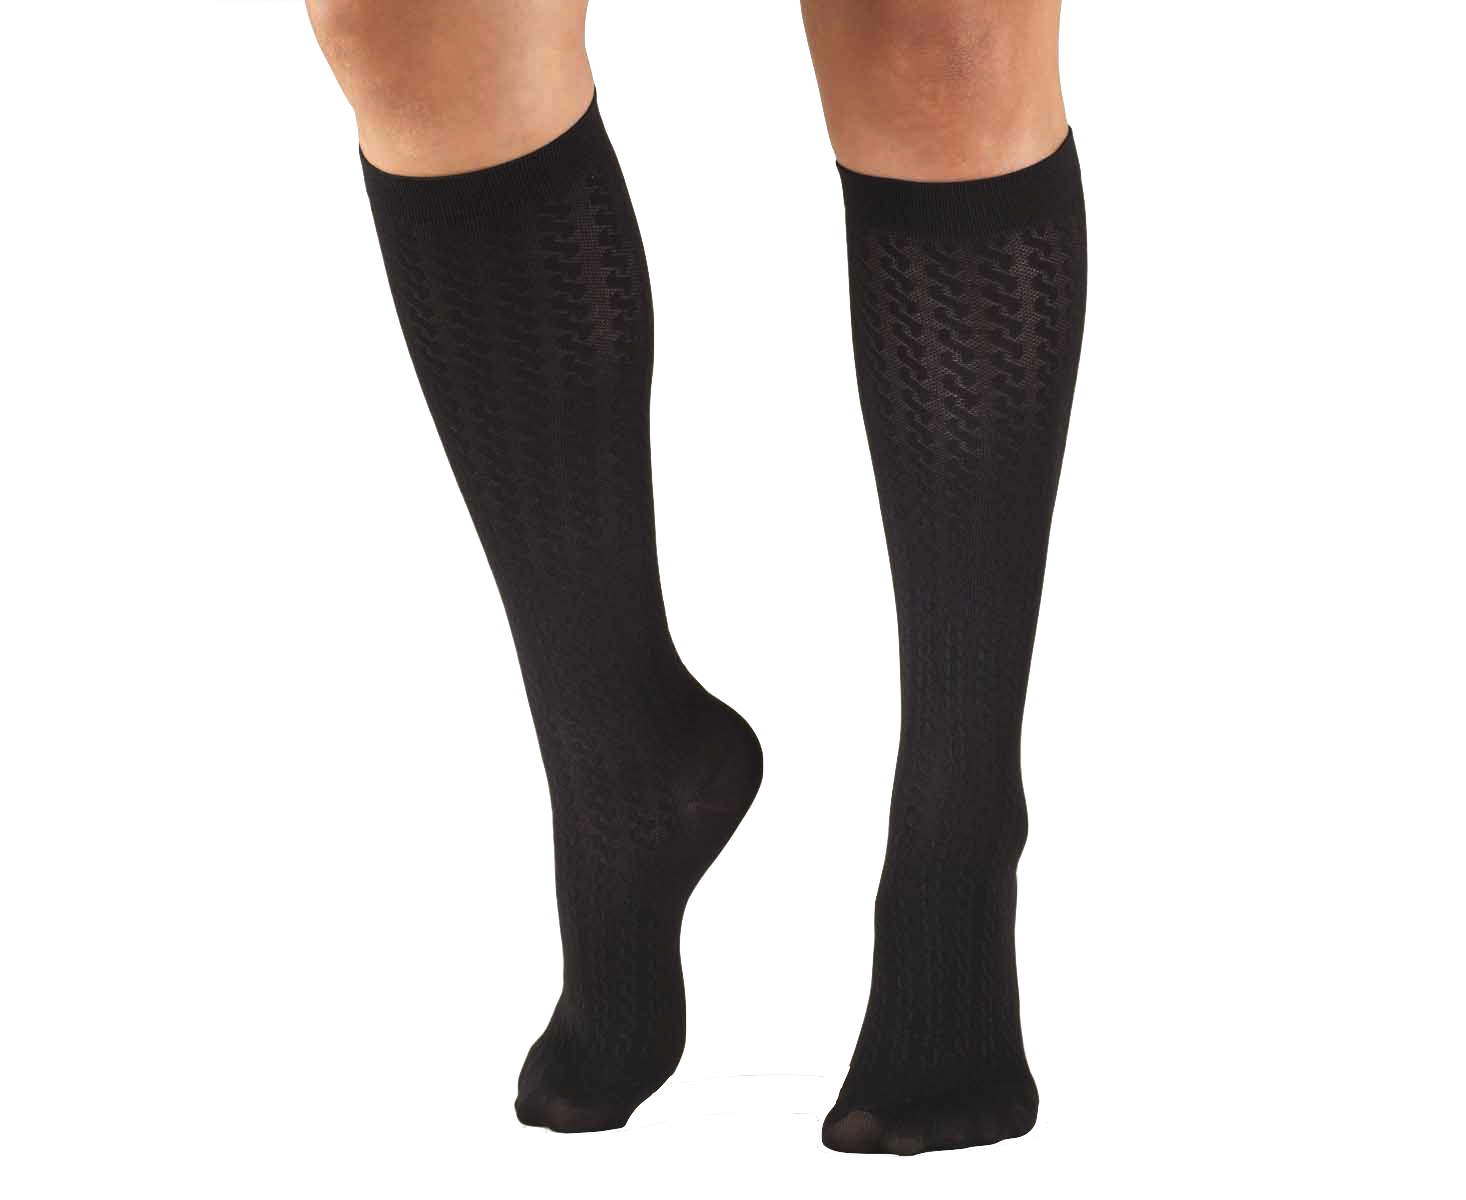 Truform 1975 (15-20 Knee High Sock, Cable Pattern)